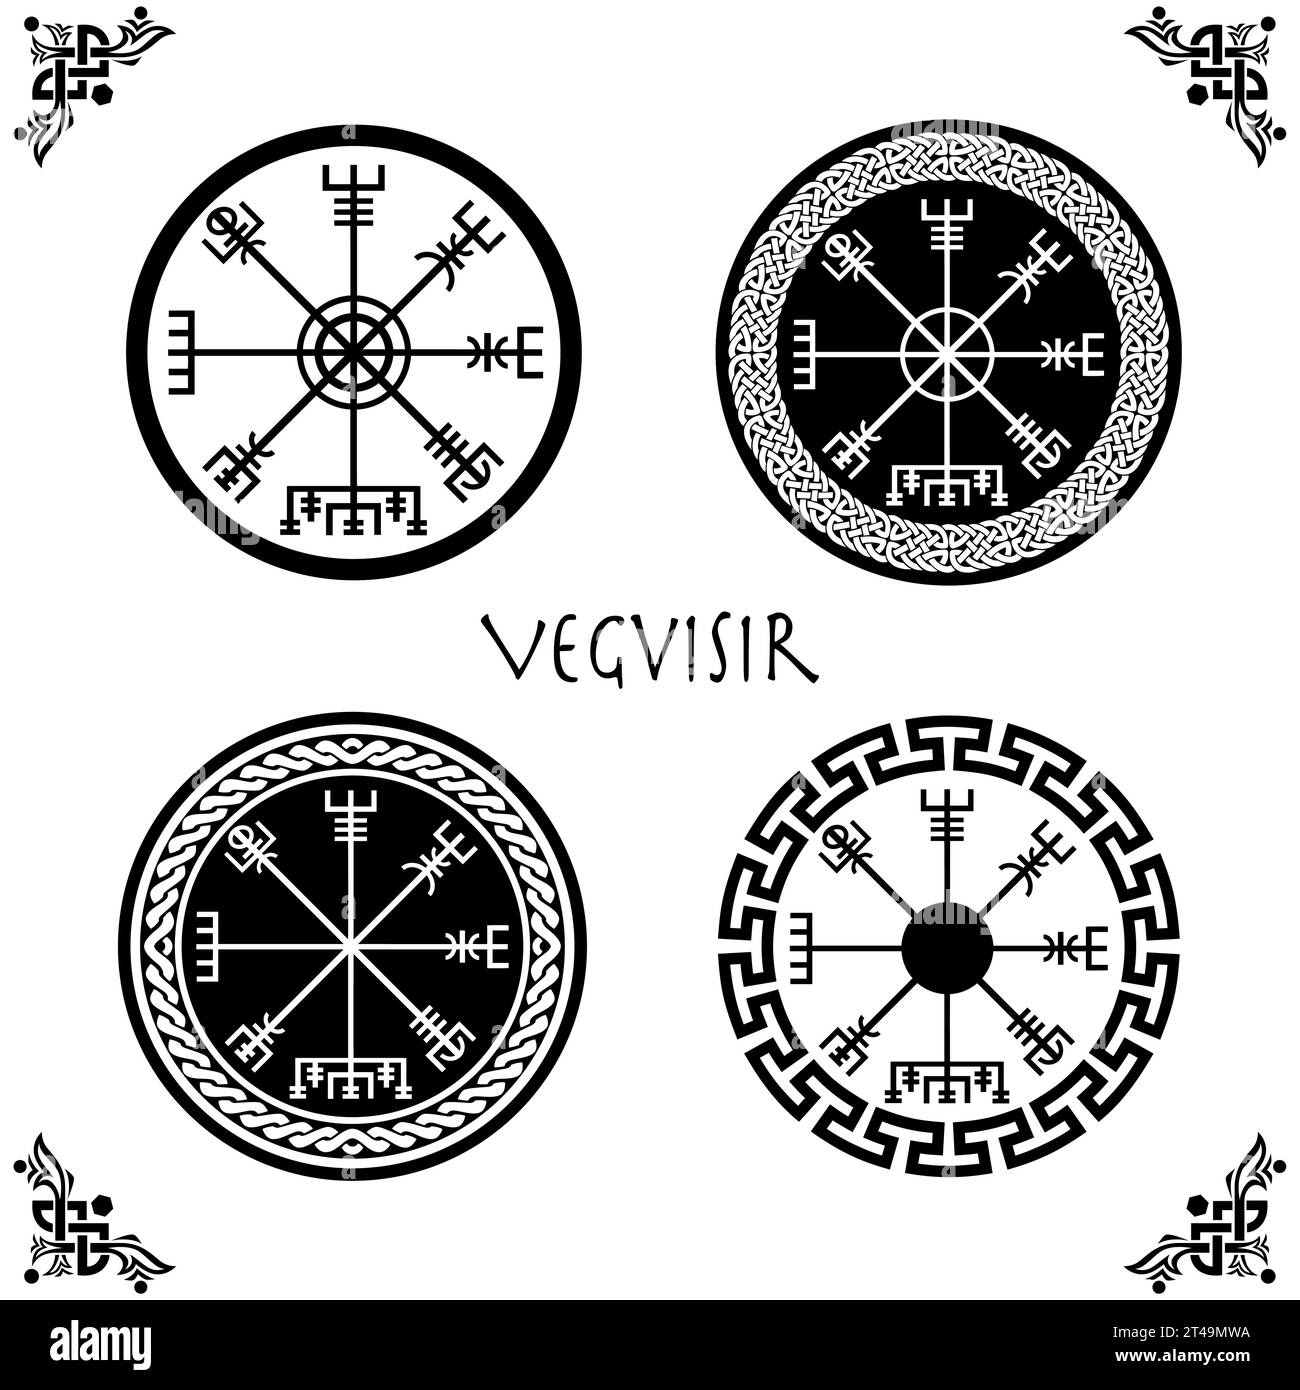 Set of Viking Vegvisir Futhark Rune Magical Navigator Compass with Celtic Knot Circle Frames. Protective runic talisman for travelers. Compass Stock Vector